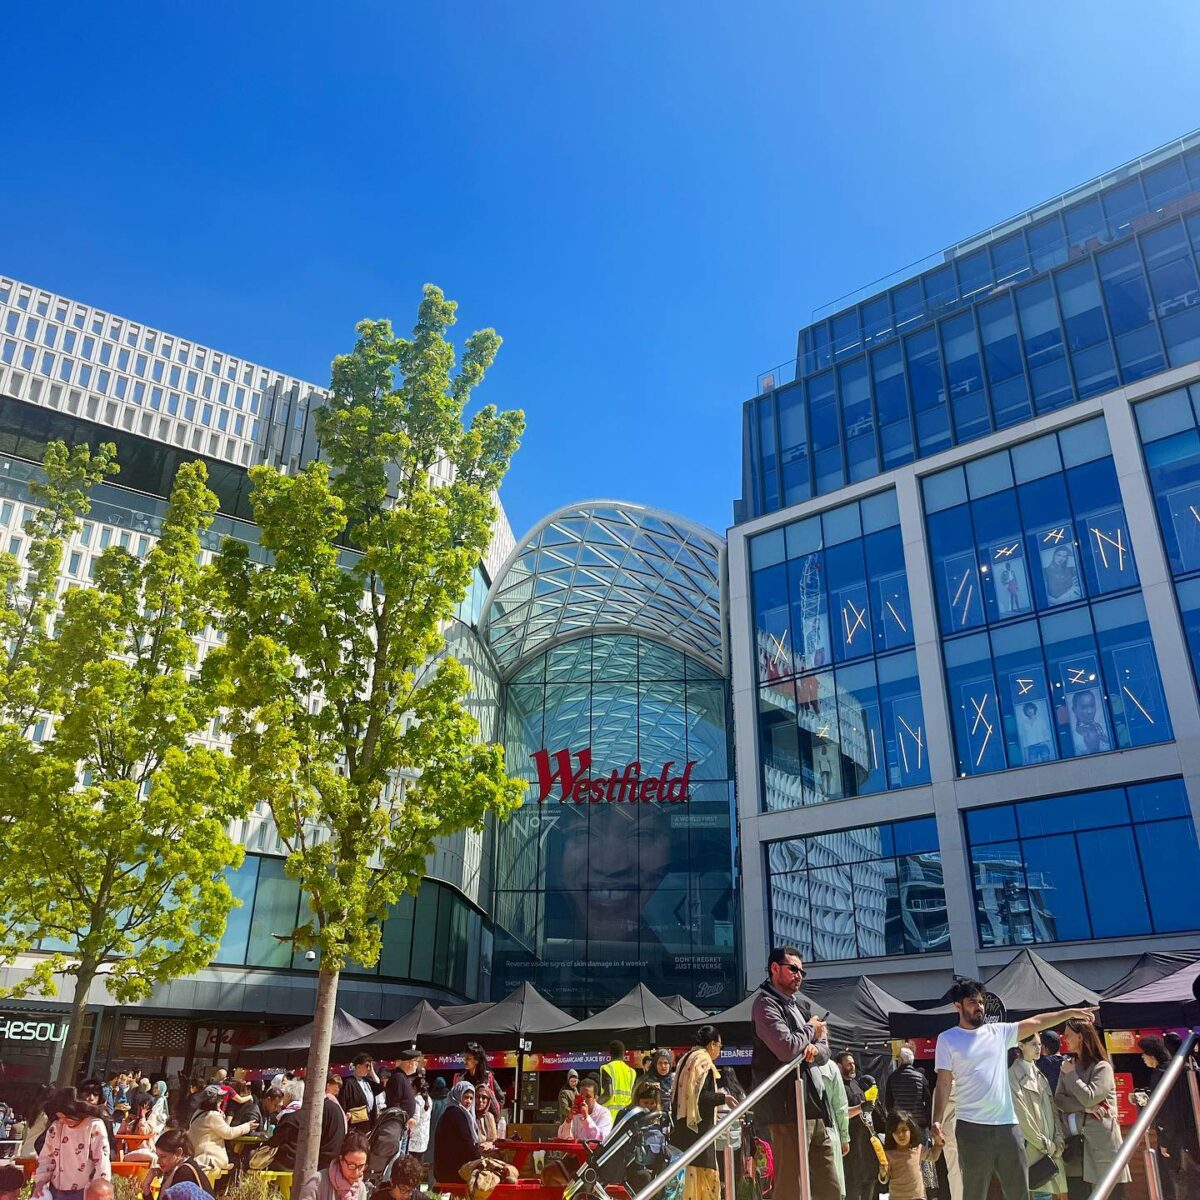 Westfield has appointed Alfred as its retained social media agency for Westfield London and Westfield Stratford City.